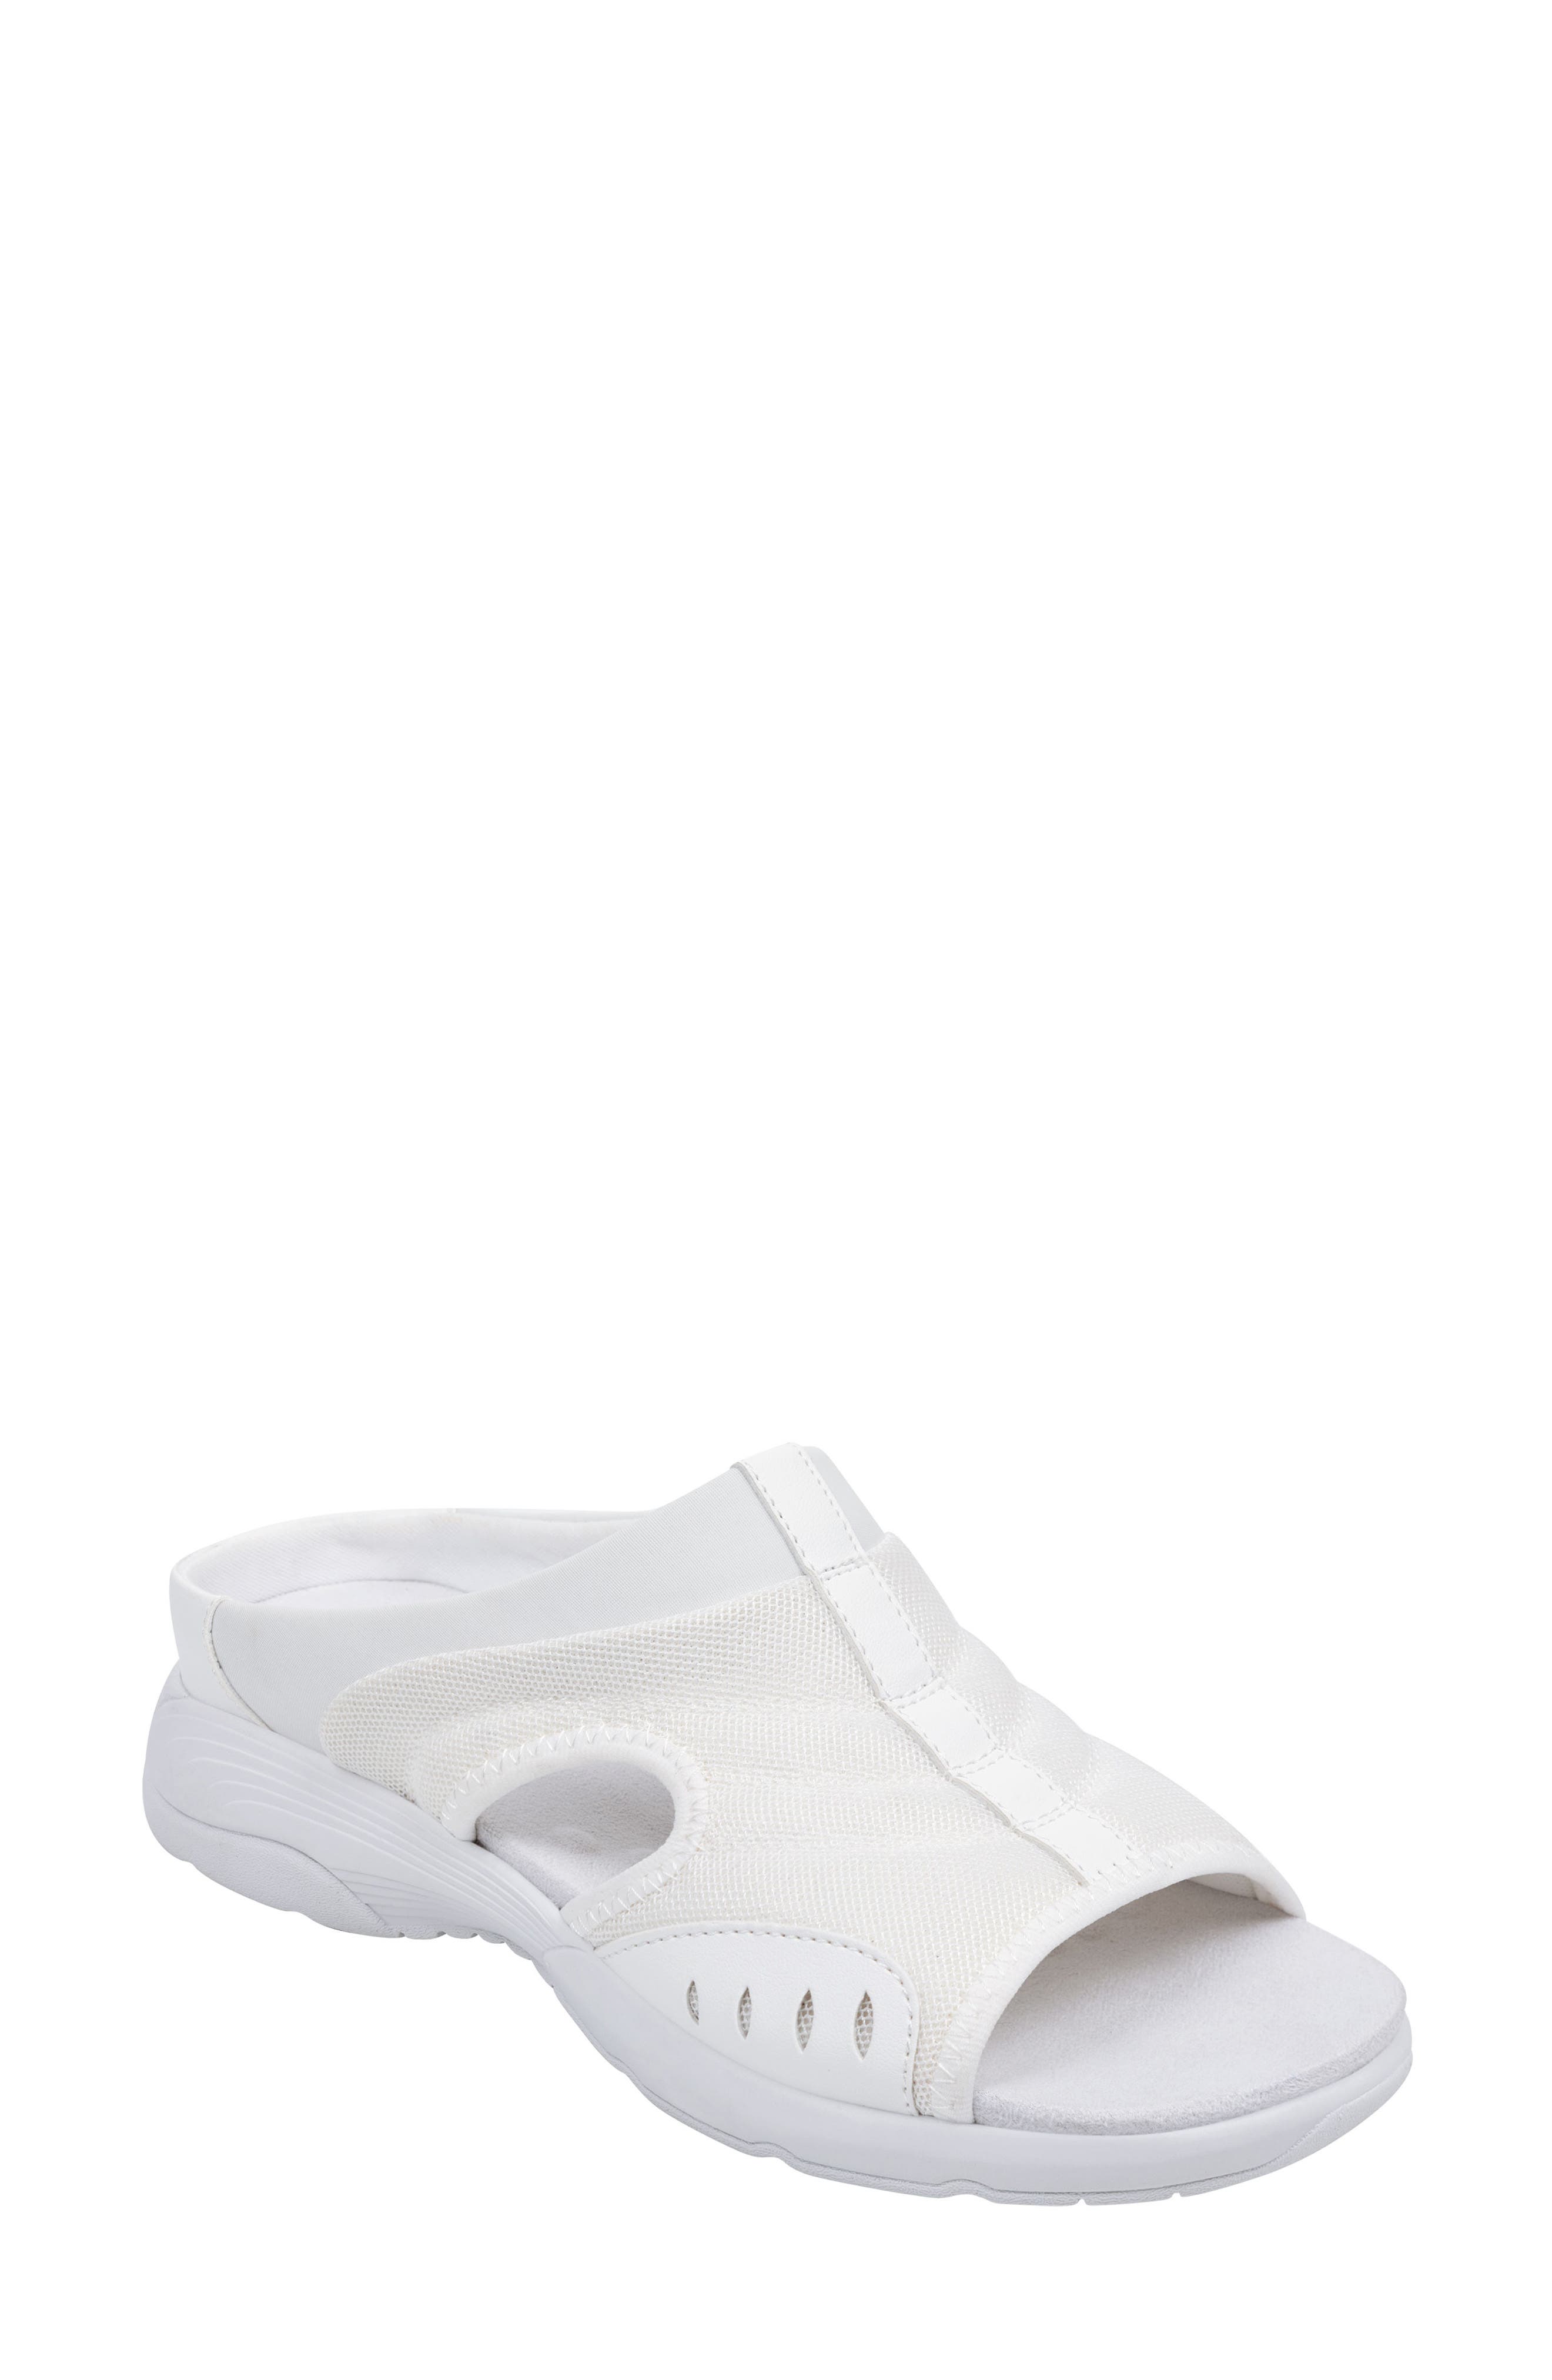 UPC 192733303975 product image for Easy Spirit Traciee Sandal in White at Nordstrom, Size 10 | upcitemdb.com